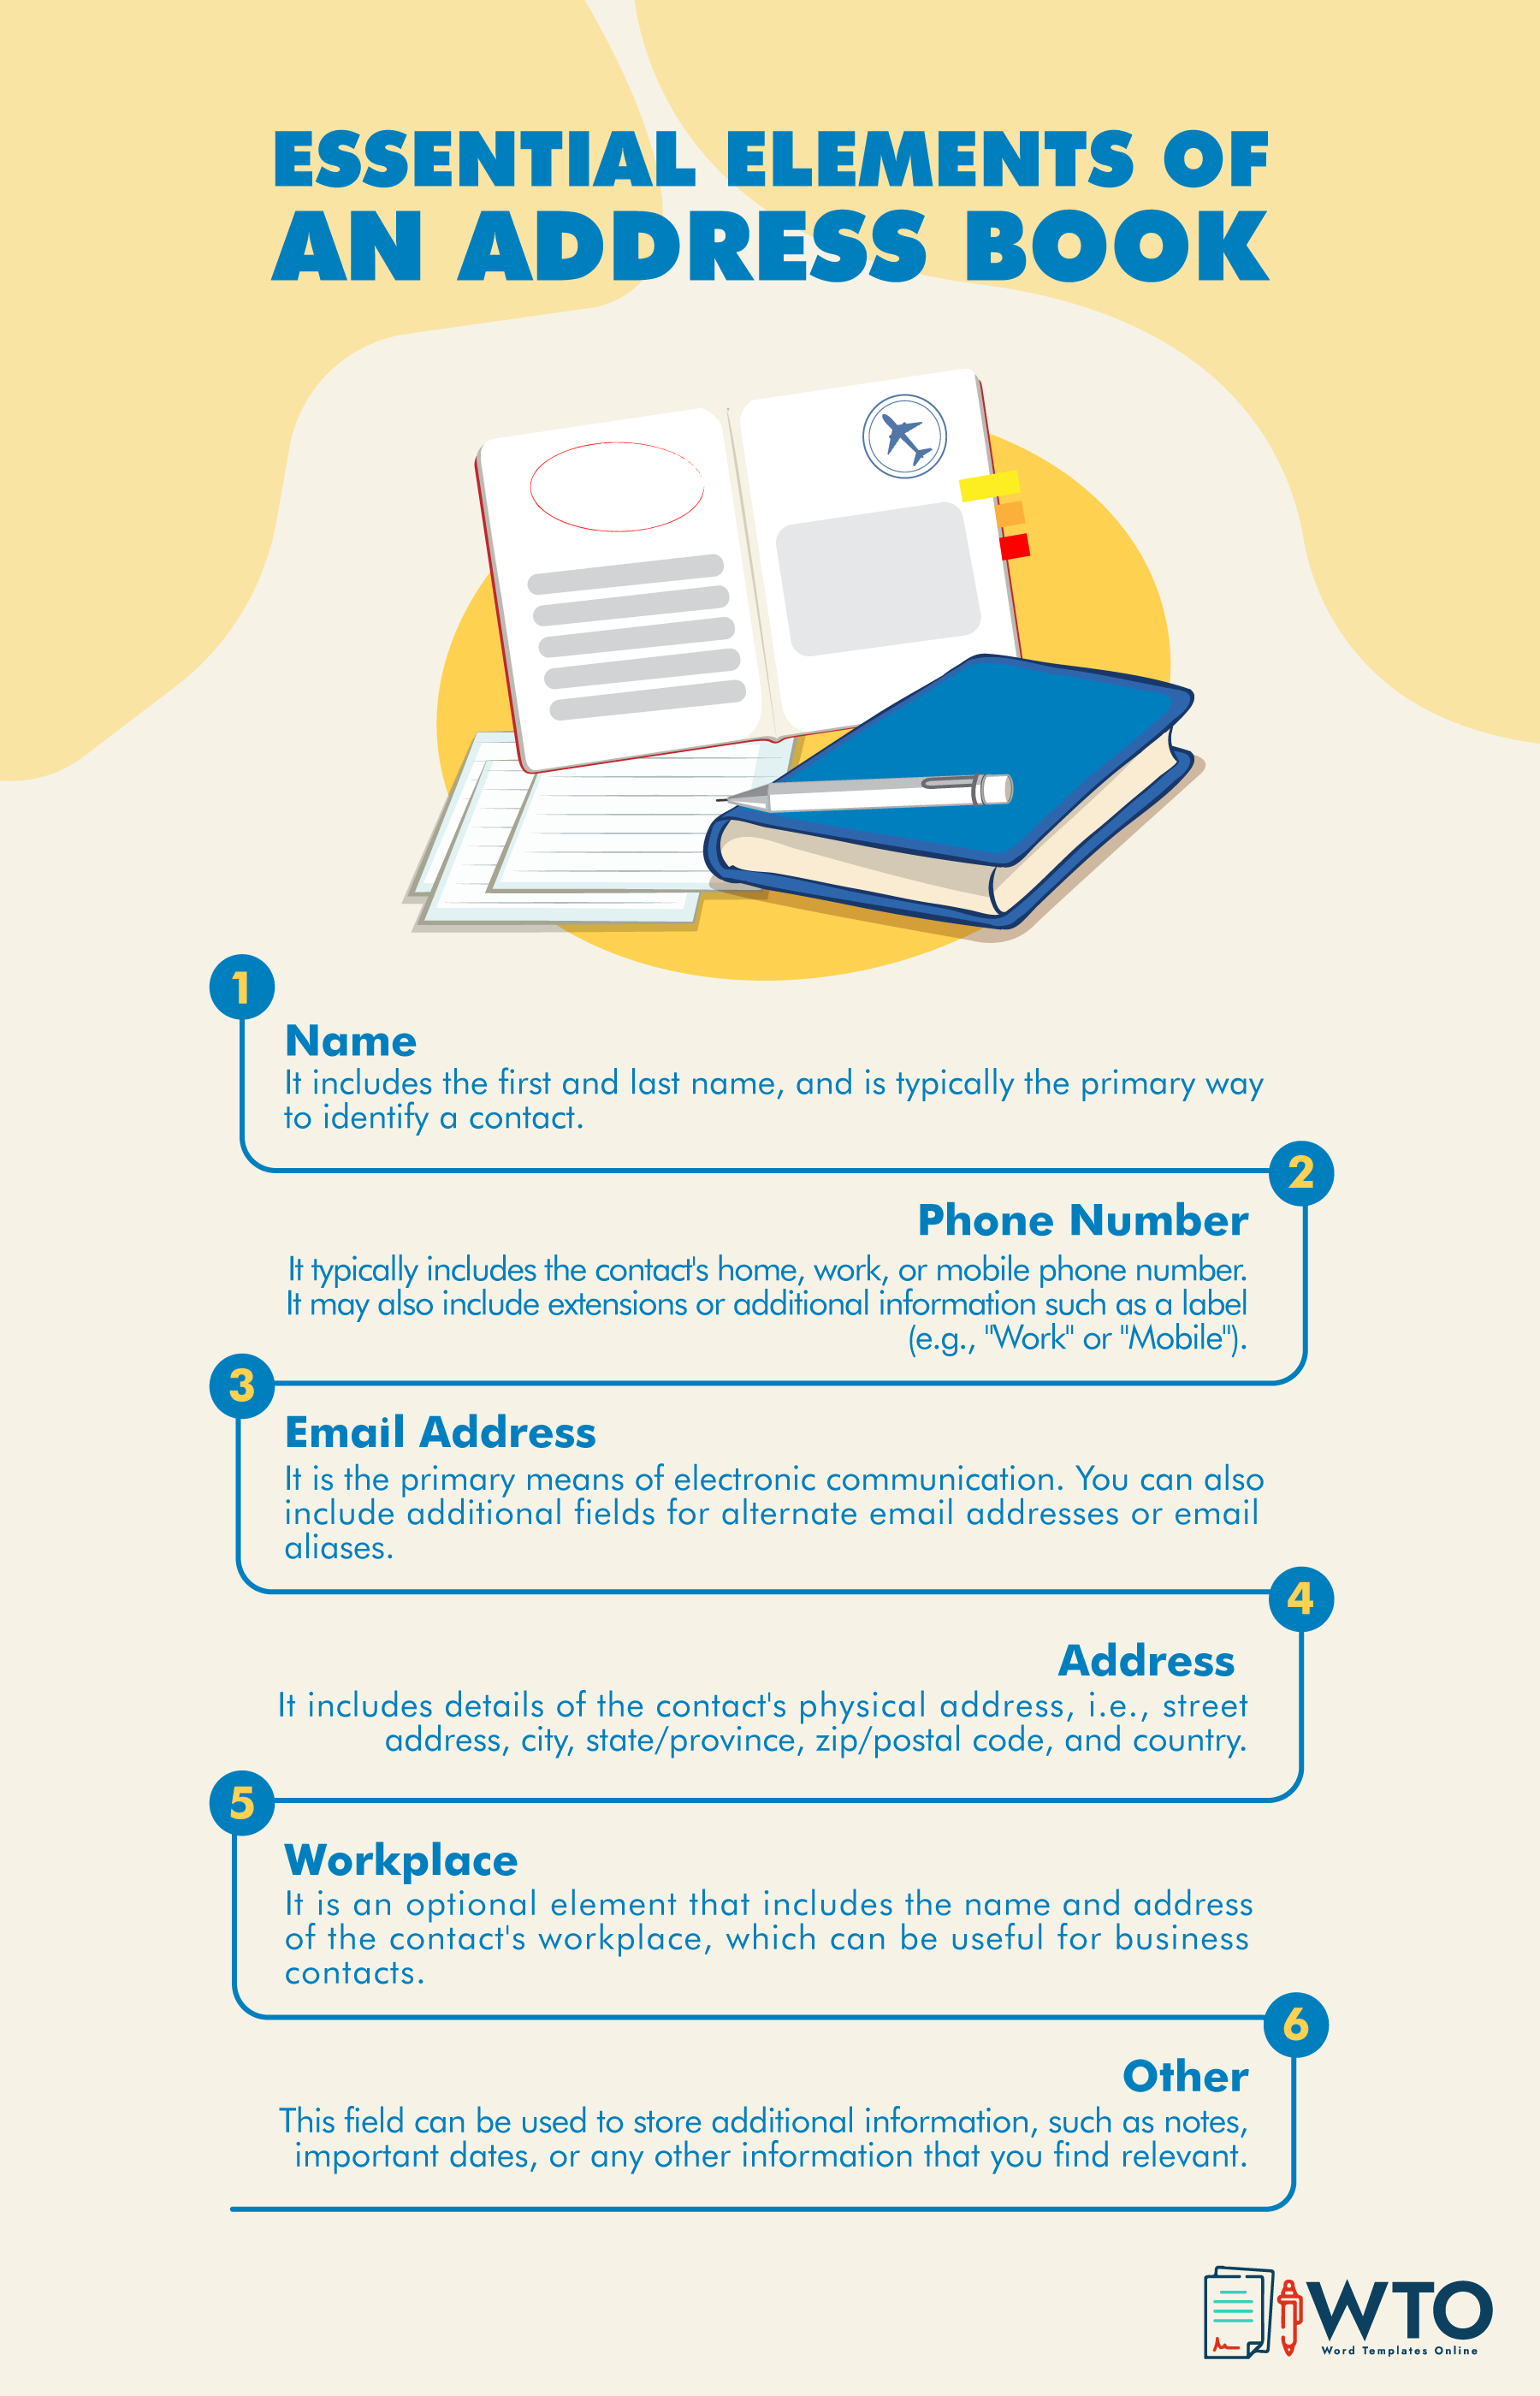 This infographic is about the essential elements of an address book.